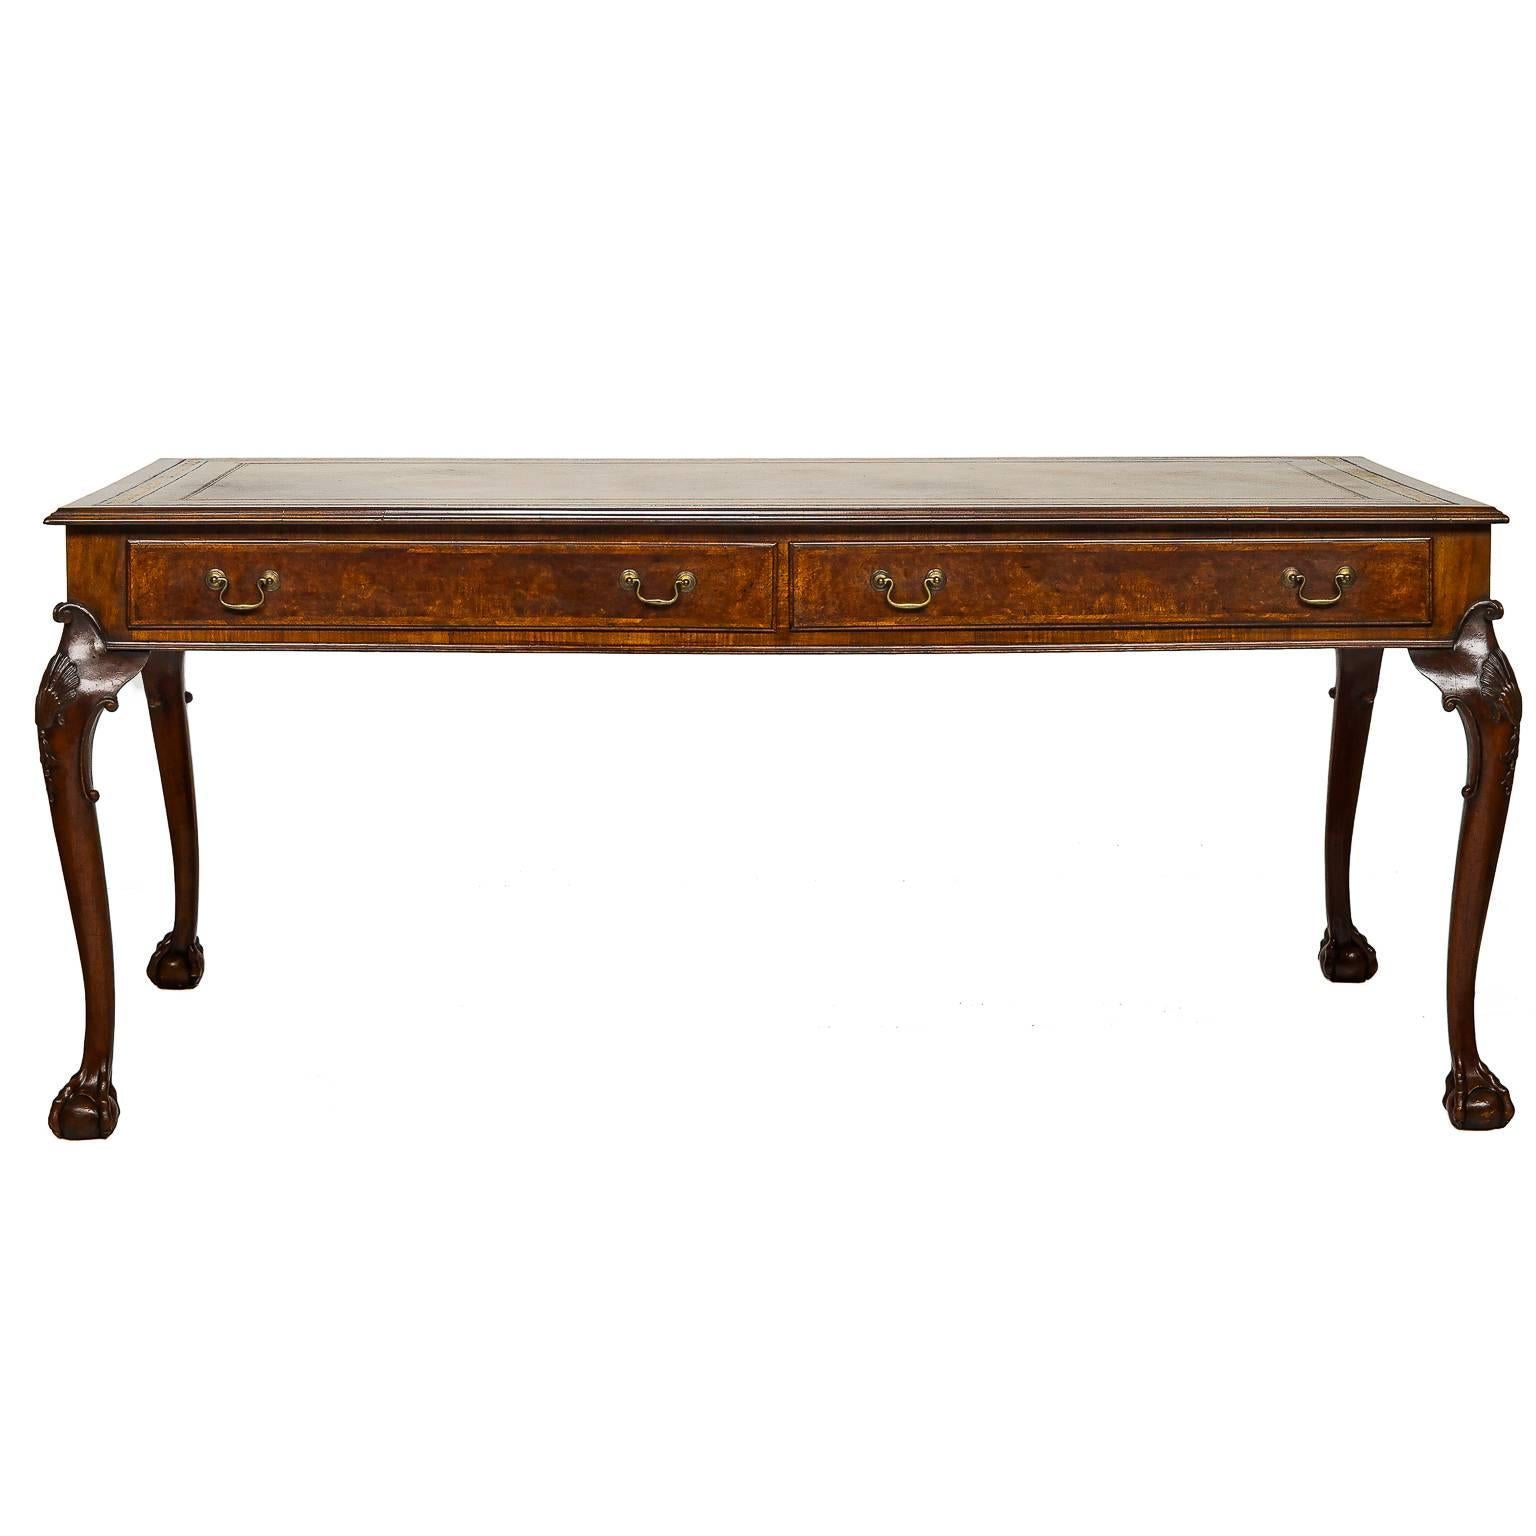 A handsome 19th century Chippendale style writing desk with a leather top. The leather has fantastic blind and gold tooling from a one piece hide. The are drawers on both side which are functional. This gives the functionality of a partners style